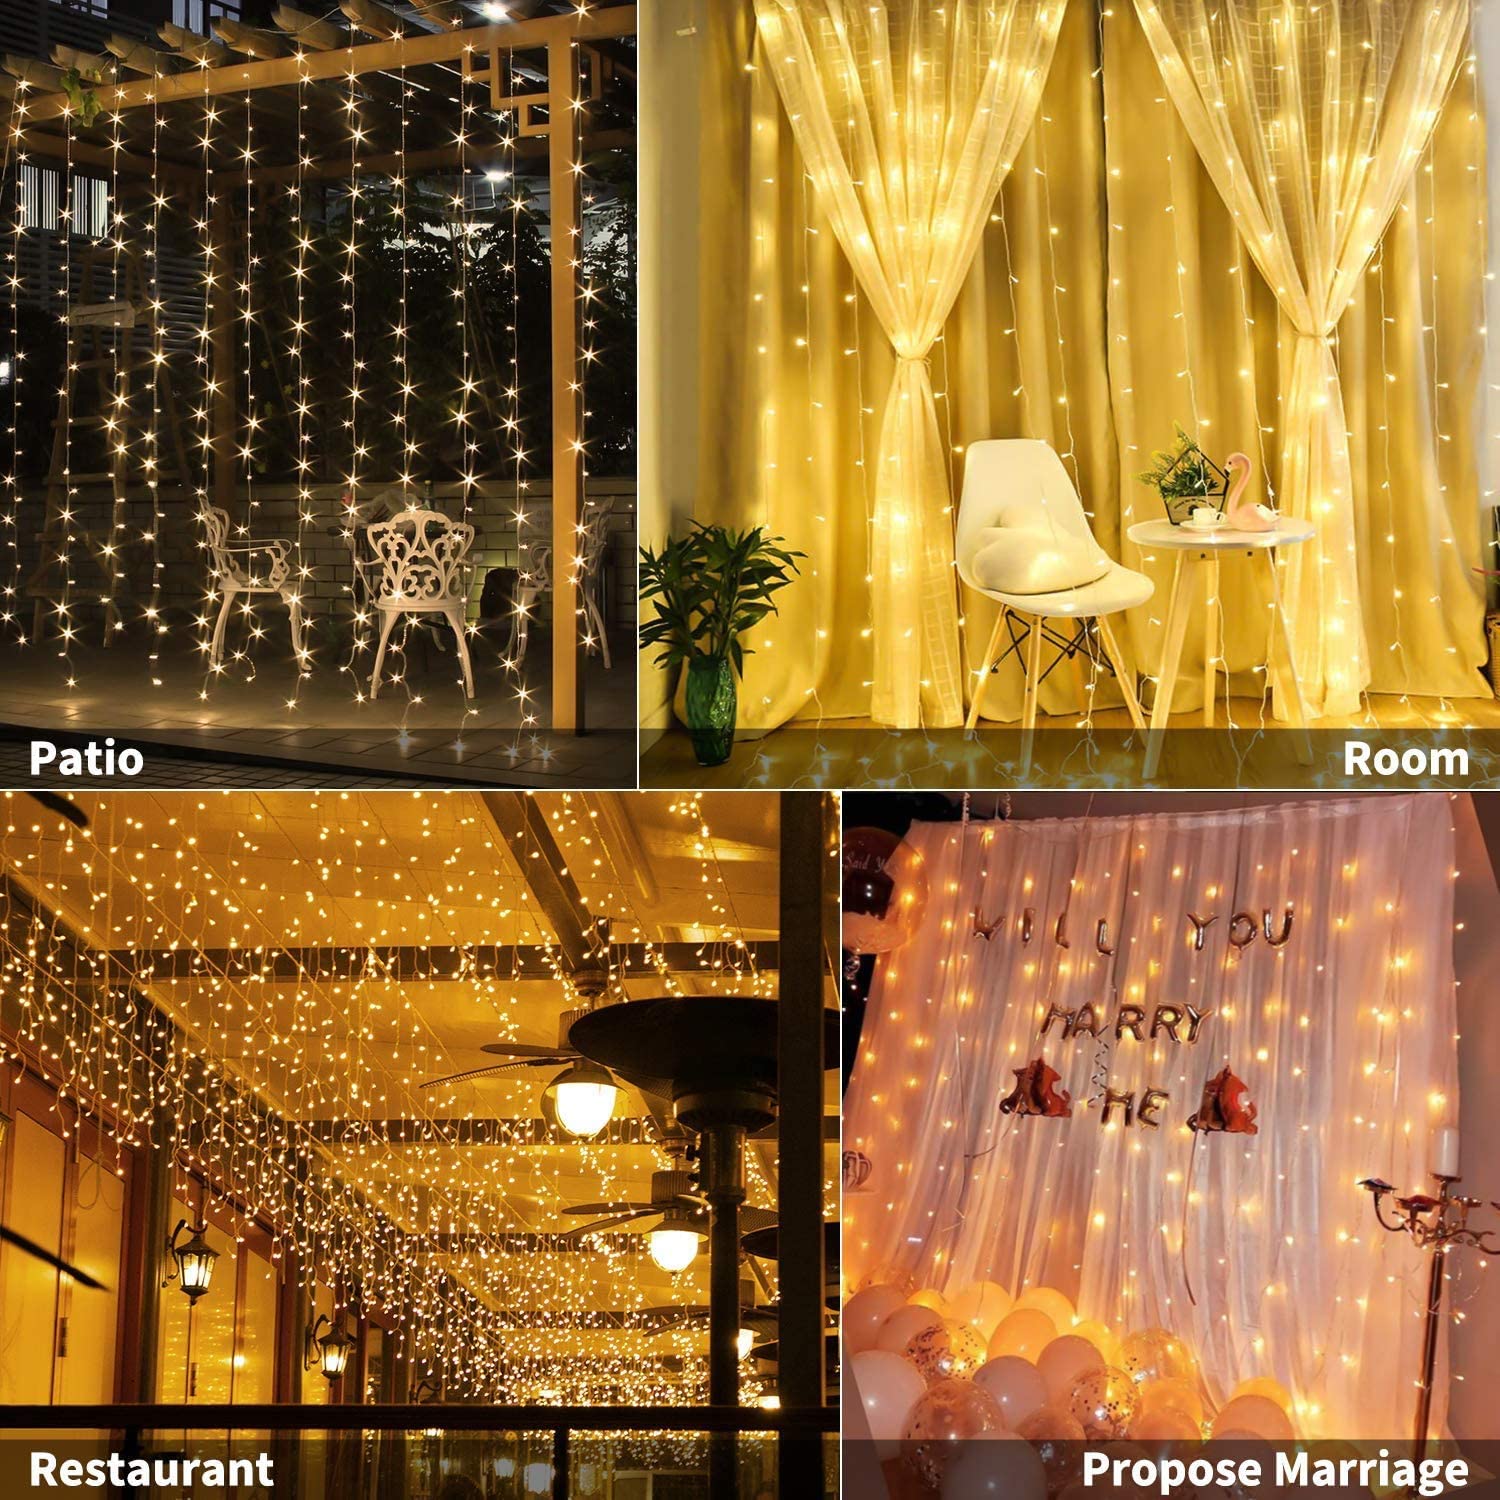 USB Powered 300 LED Curtain String Light with 8 Modes and Remote Control for Bedroom Party Wedding Decorations Deals499